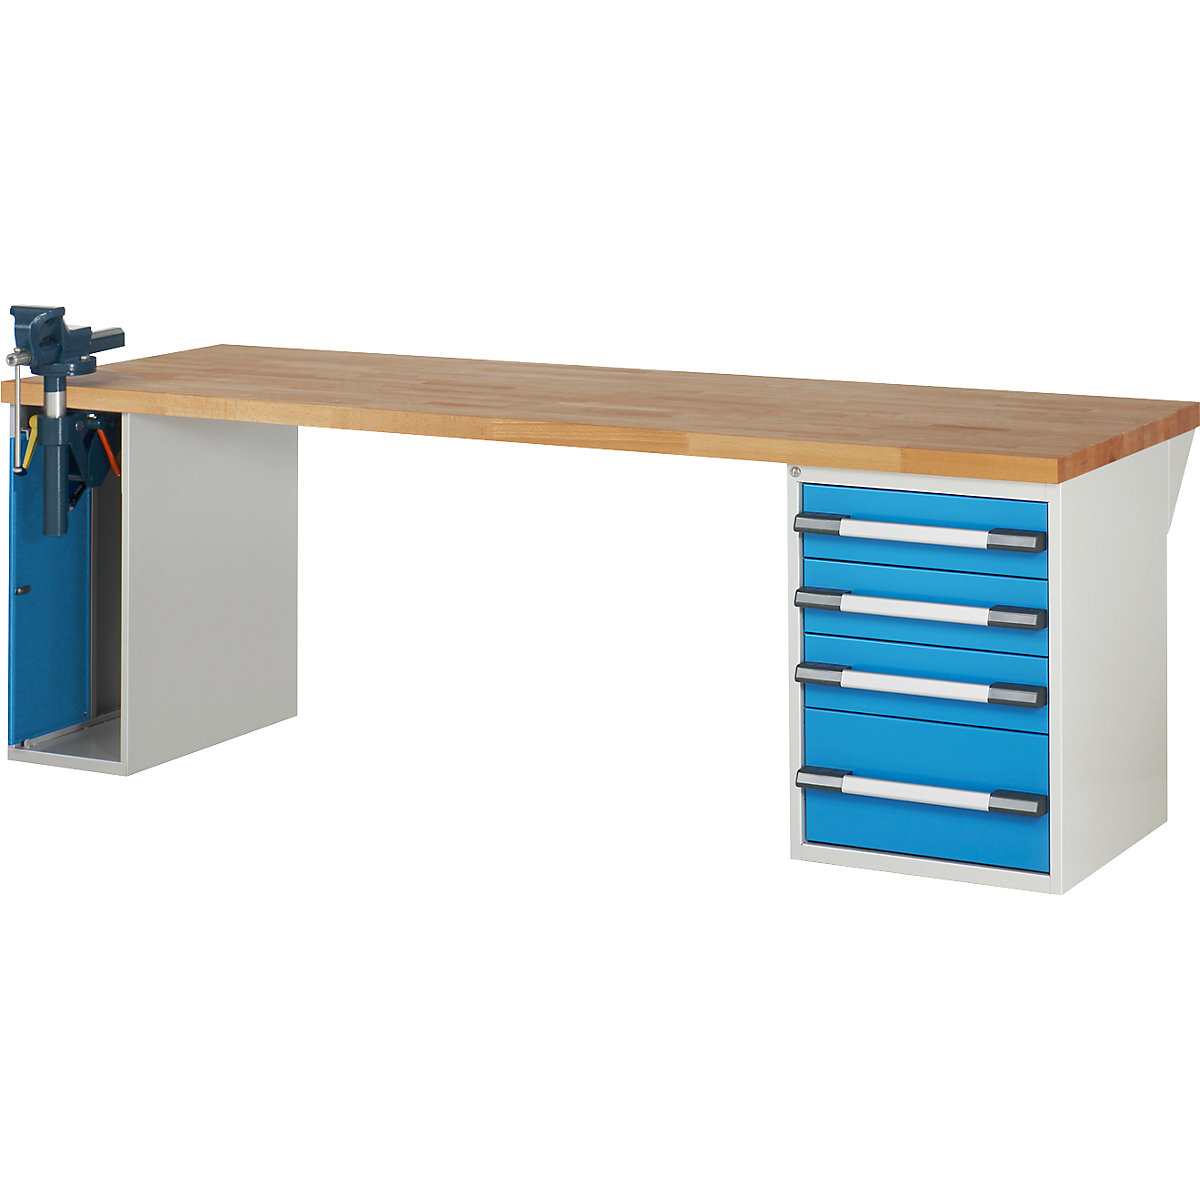 Workbench, Series 7 modular system – eurokraft pro, 1 cupboard, 1 fixed pedestal with 4 drawers, WxD 2500 x 900 mm-2